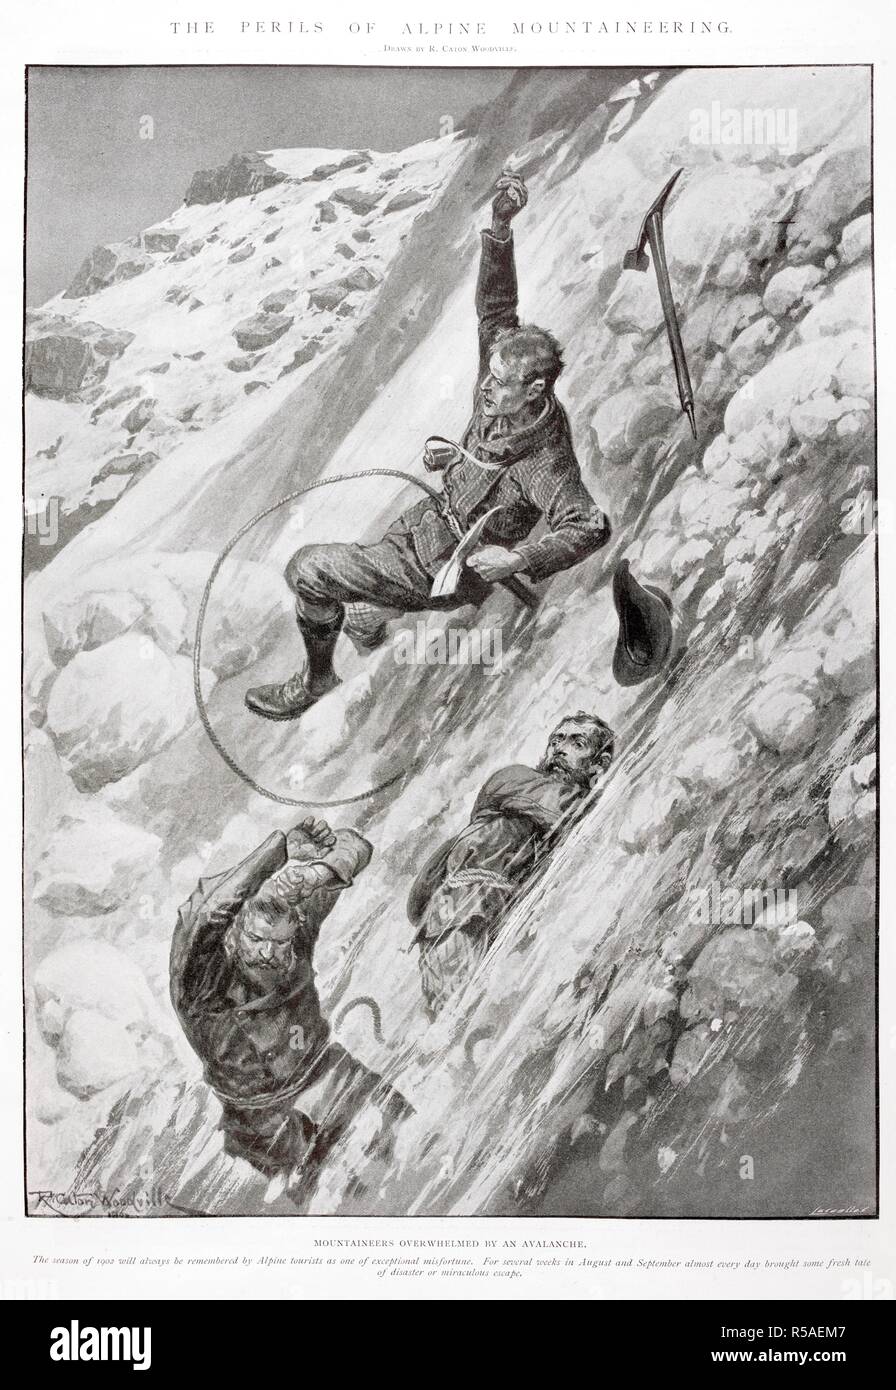 'The perils of Alpine mountaineering'. 'Mountaineers overwhelmed by an avalanche'. The Illustrated London News. London, 1902. Source: The Illustrated London News 4 October 1910 page 495. Author: Caton Woodville, R. Stock Photo